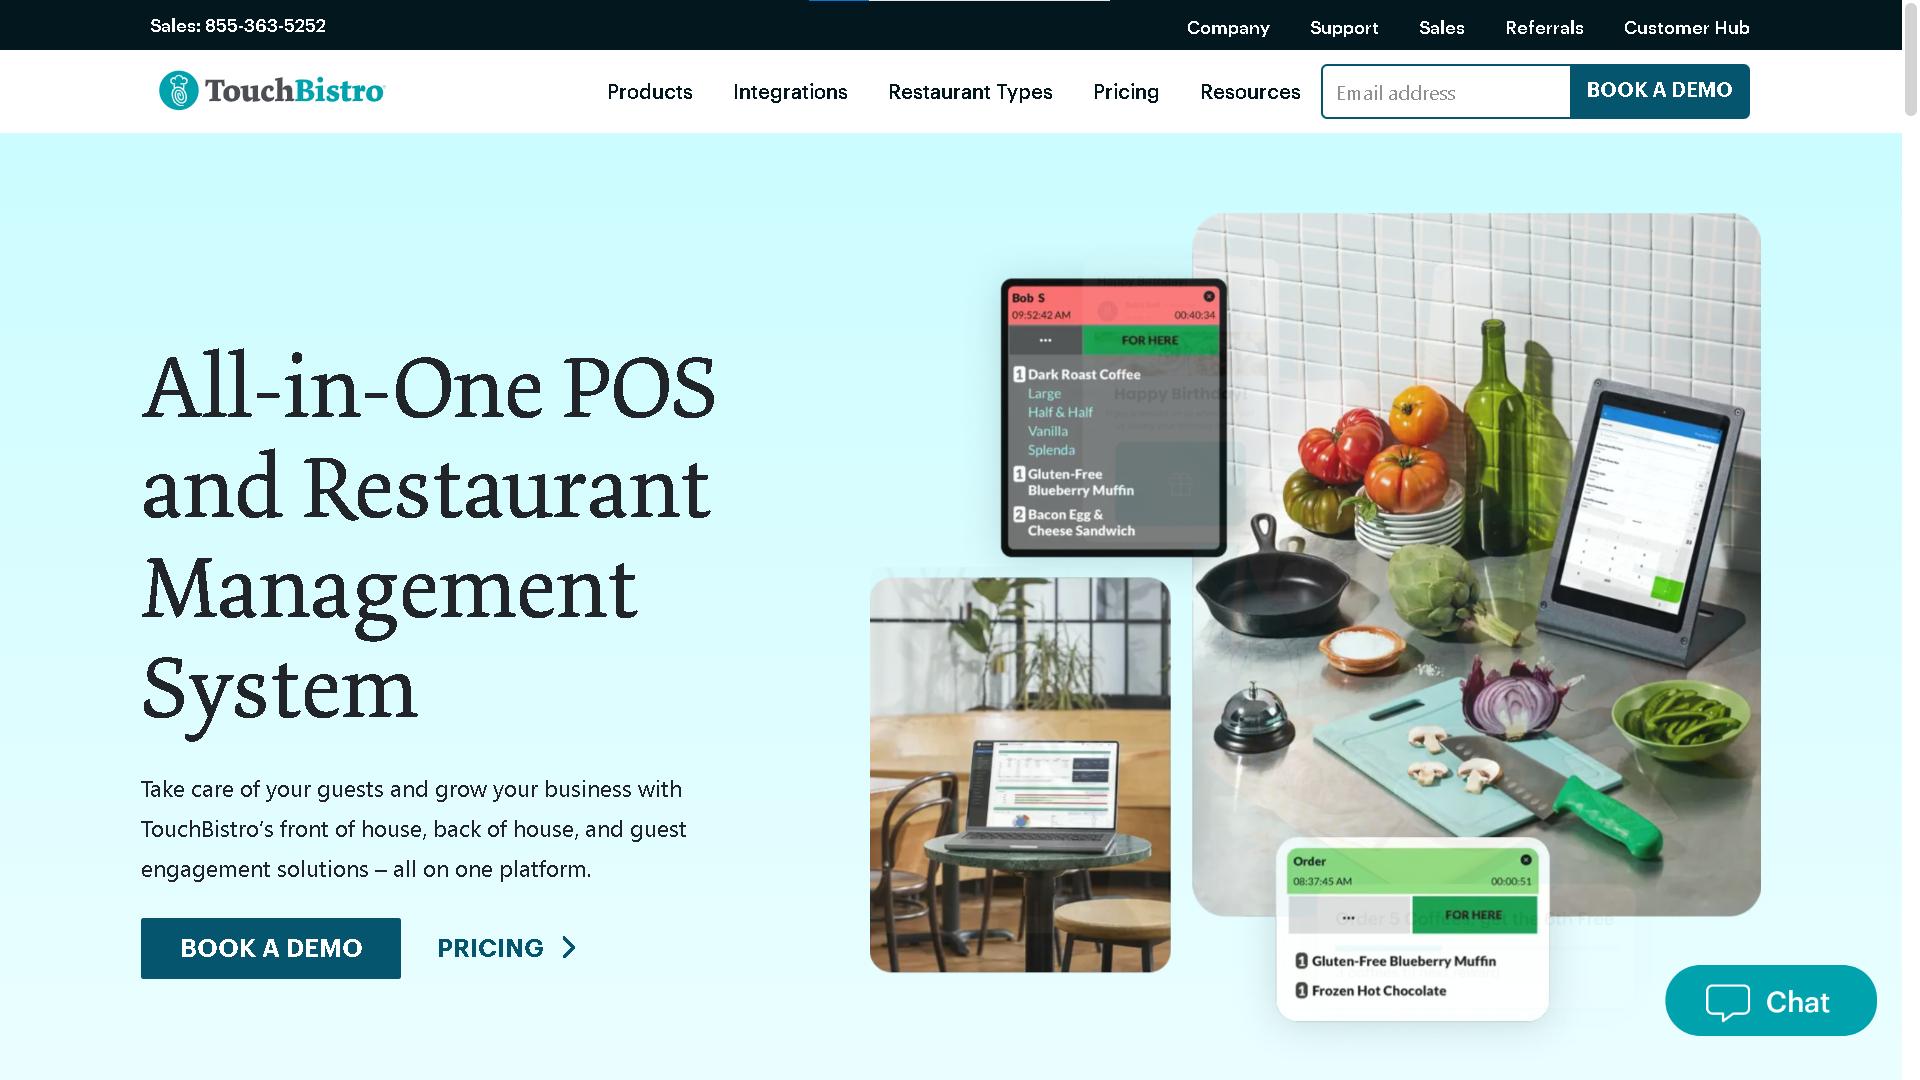 touchbistro tablet pos main page